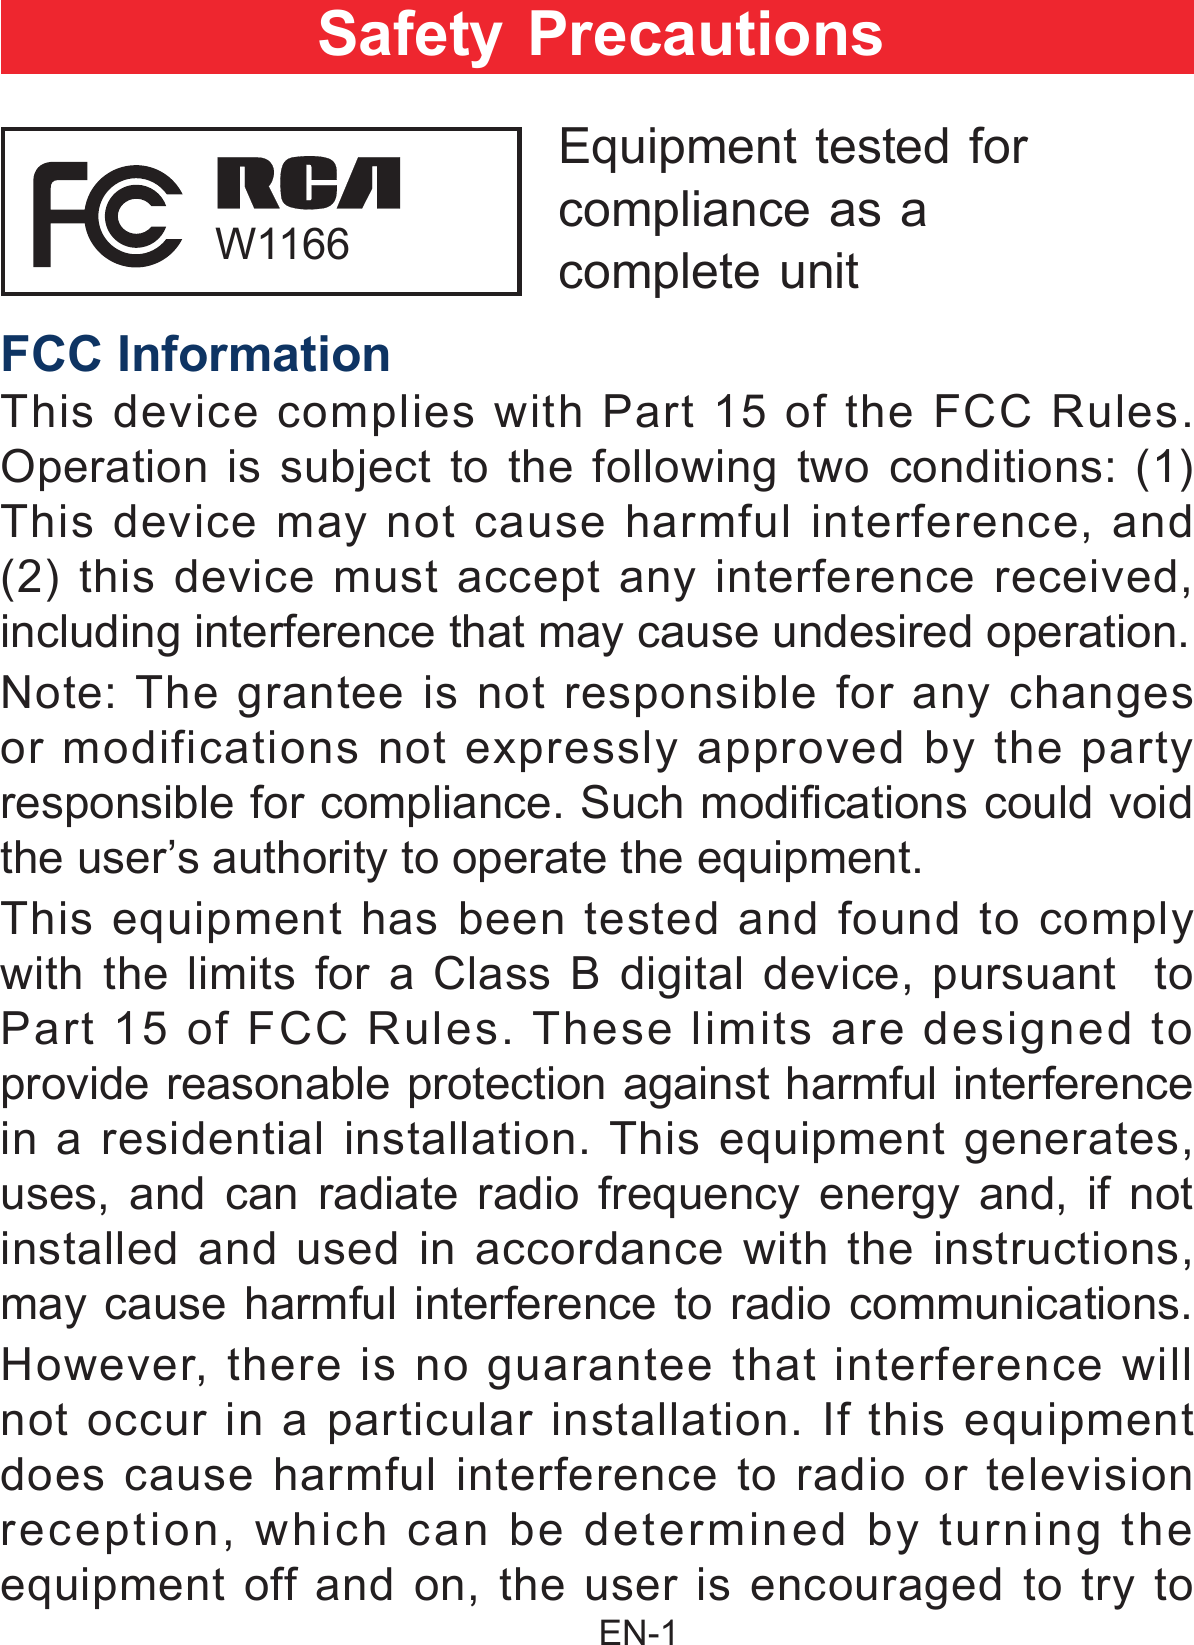                                                EN-1 FCC InformationThis device complies with Part 15 of the FCC Rules. Operation is subject to the following two conditions: (1) This device may not cause harmful interference, and (2) this device must accept any interference received, including interference that may cause undesired operation.Note: The grantee is not responsible for any changes or modifications not expressly approved by the party responsible for compliance. Such modifications could void the user’s authority to operate the equipment. This equipment has been tested and found to comply with the limits for a Class B digital device, pursuant  to Part 15 of FCC Rules. These limits are designed to provide reasonable protection against harmful interference in a residential installation. This equipment generates, uses, and can radiate radio frequency energy and, if not installed and used in accordance with the instructions, may cause harmful interference to radio communications.However, there is no guarantee that interference will not occur in a particular installation. If this equipment does cause harmful interference to radio or television reception, which can be determined by turning the equipment off and on, the user is encouraged to try to Safety PrecautionsEquipment tested forcompliance as acomplete unit W1166